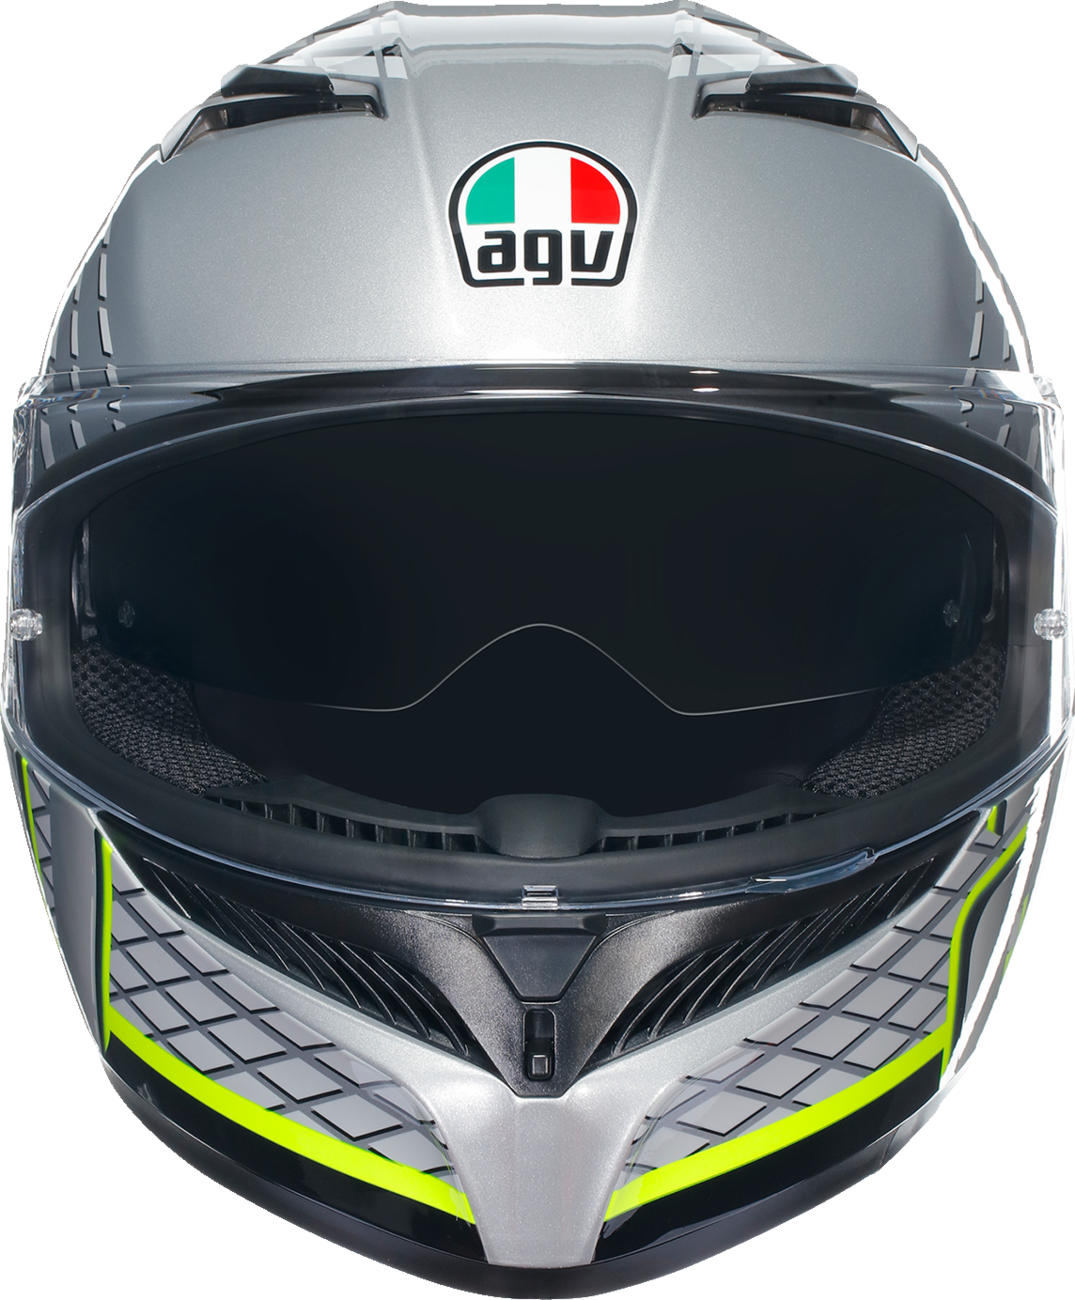 AGV K3 Helmet - Fortify - Gray/Black/Yellow Fluo - Large 2118381004011L